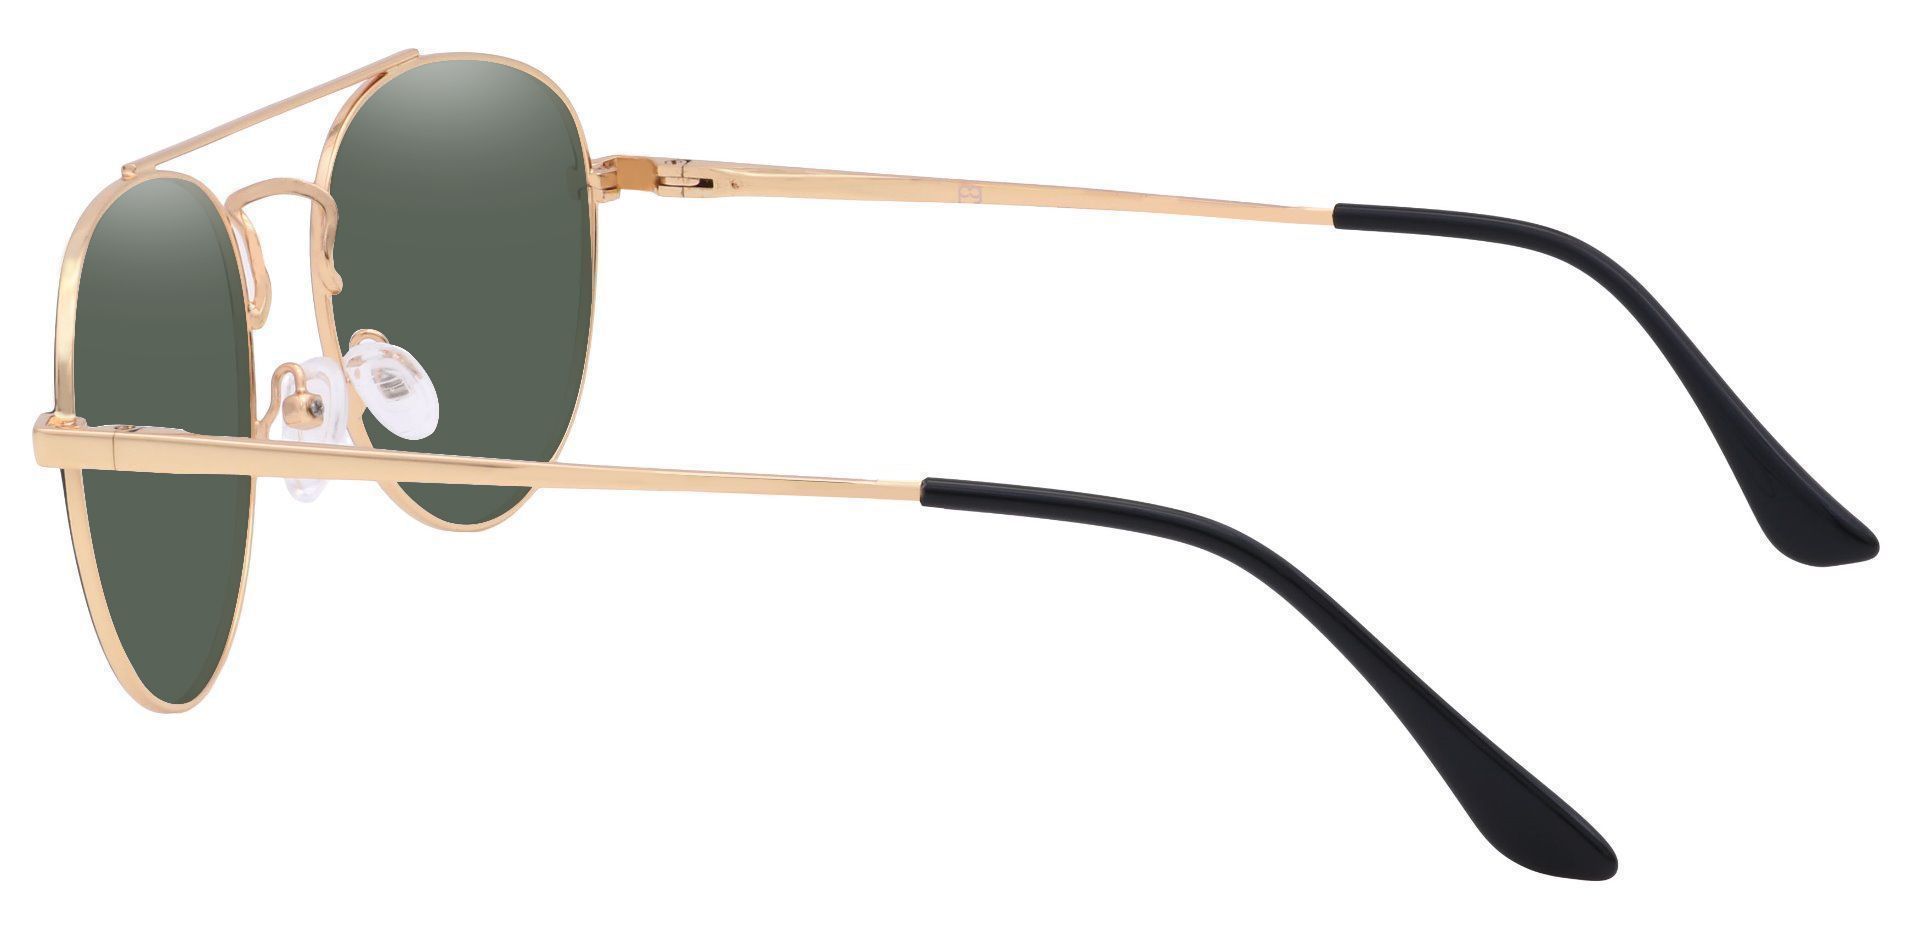 Trapp Aviator Non-Rx Sunglasses - Gold Frame With Green Lenses